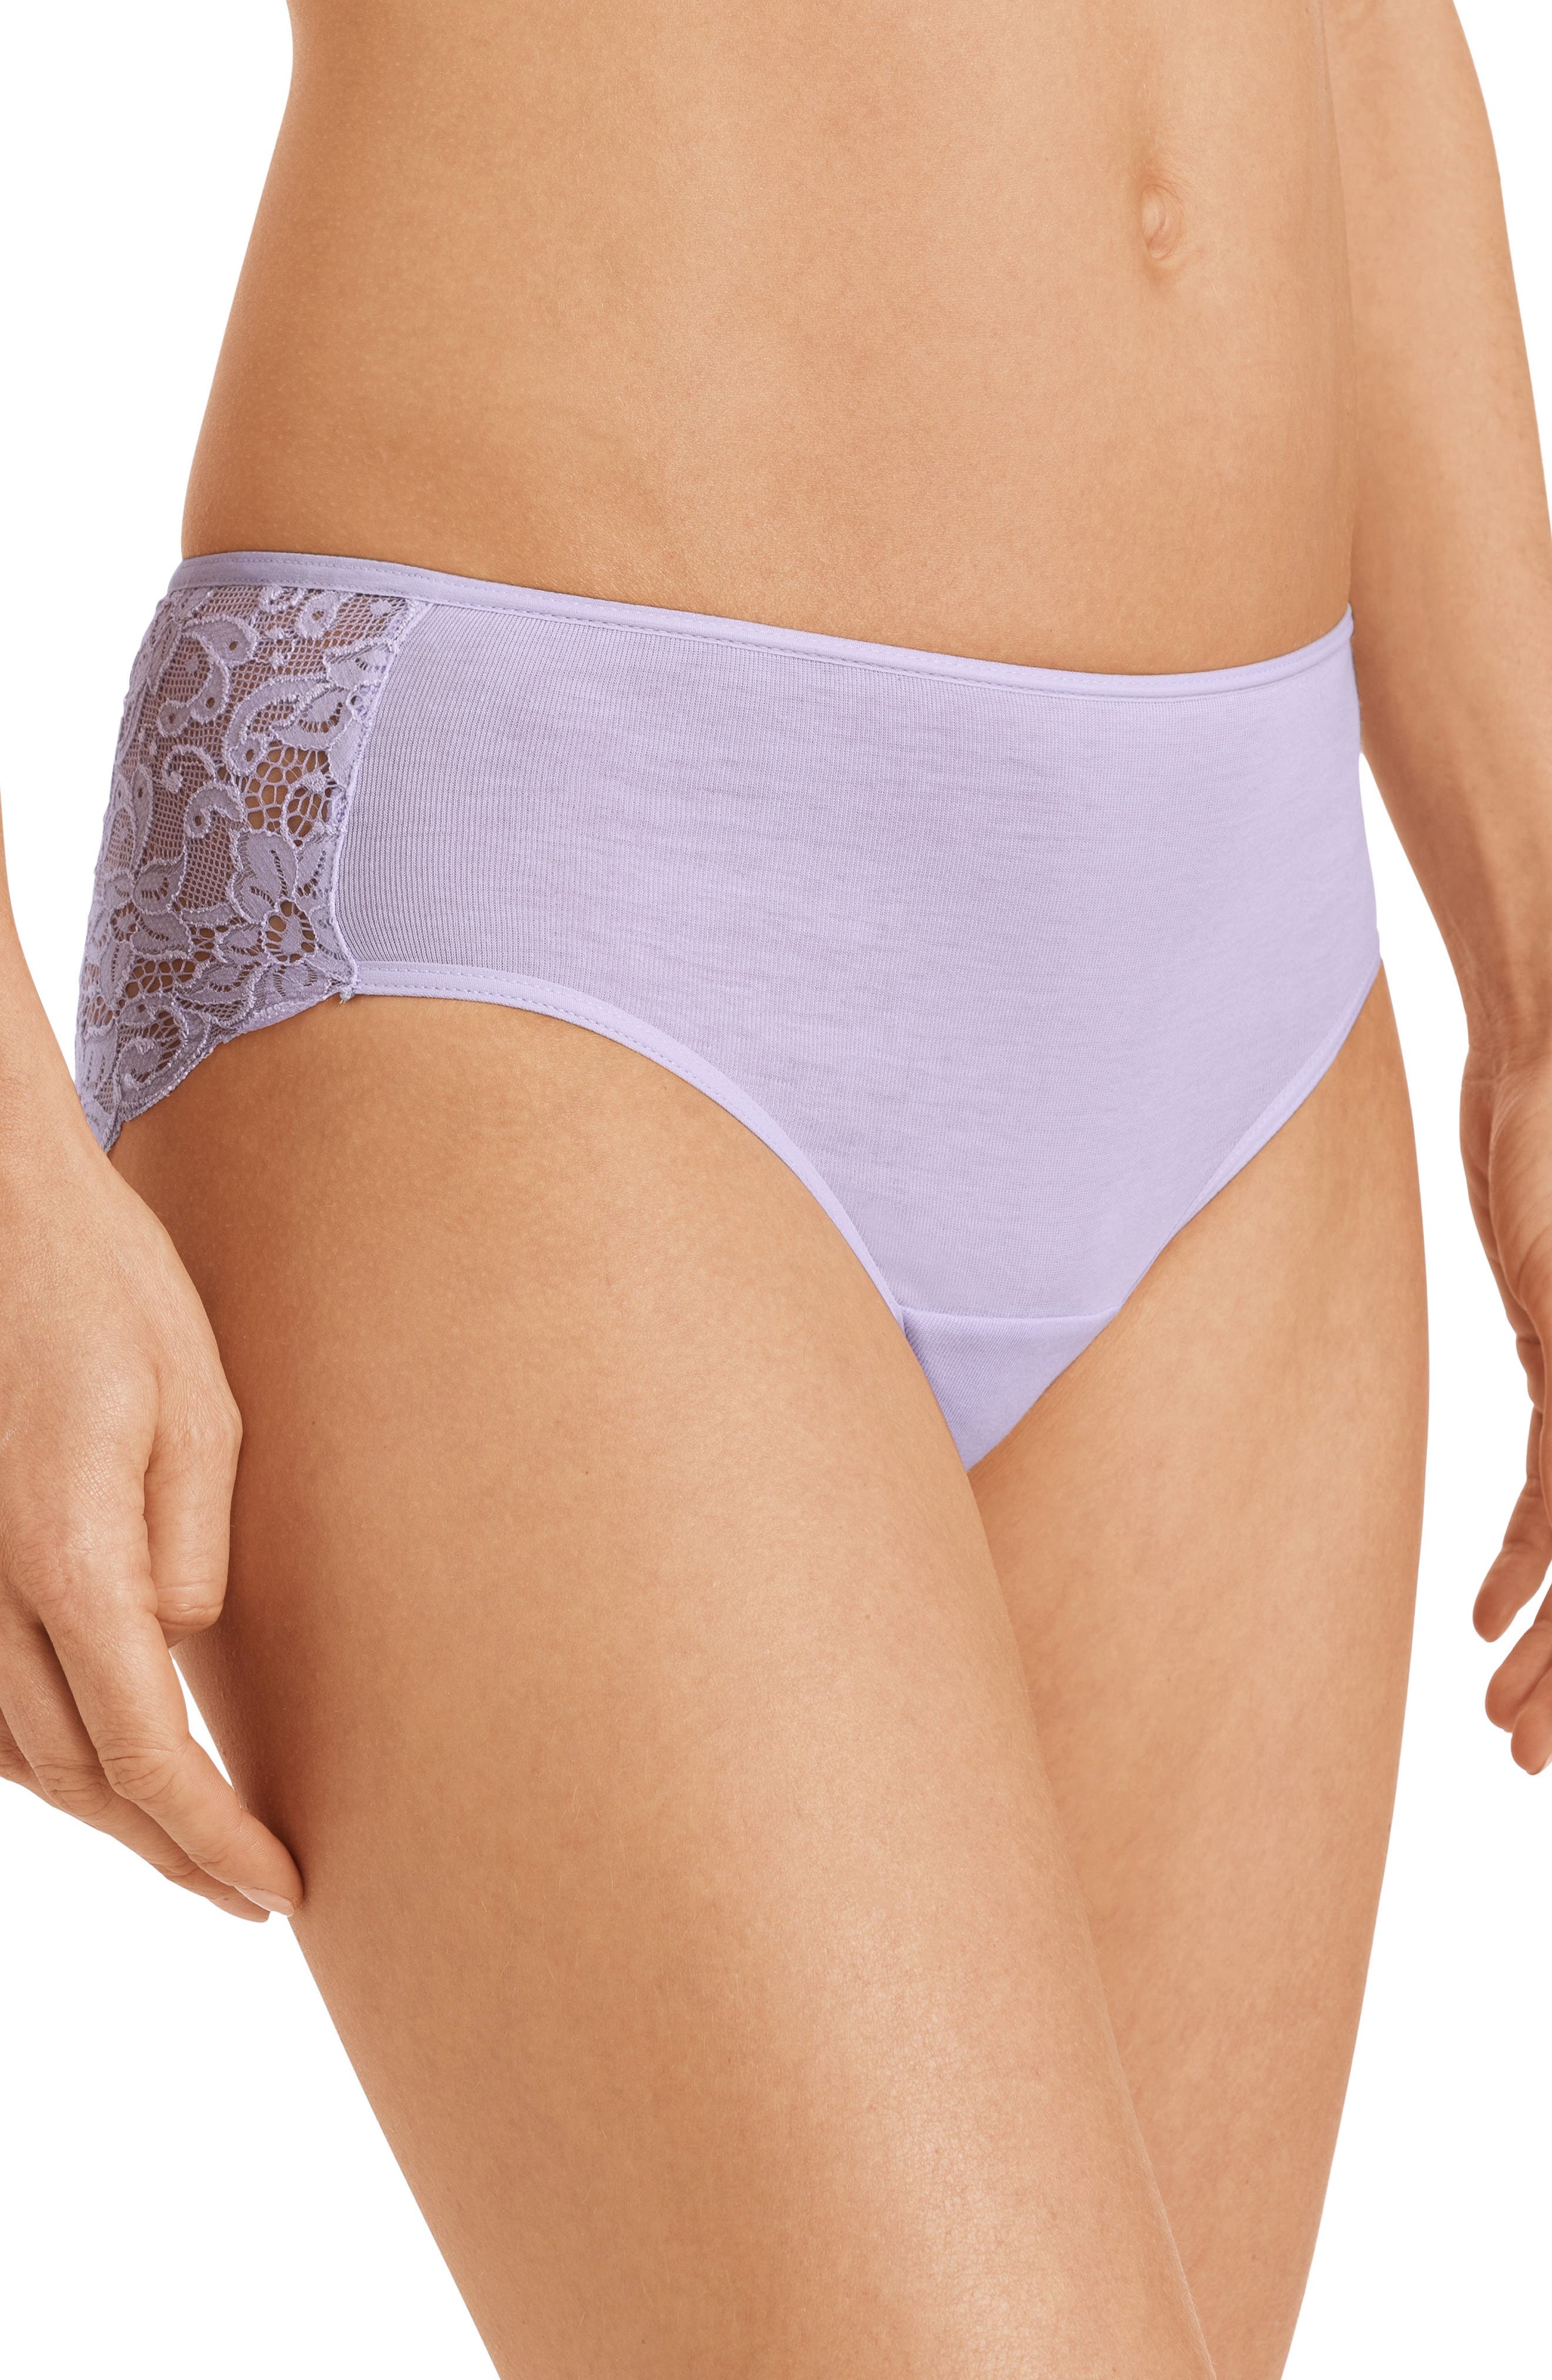 HANRO LUXURY MOMENTS LACE BACK BRIEFS,888721367875